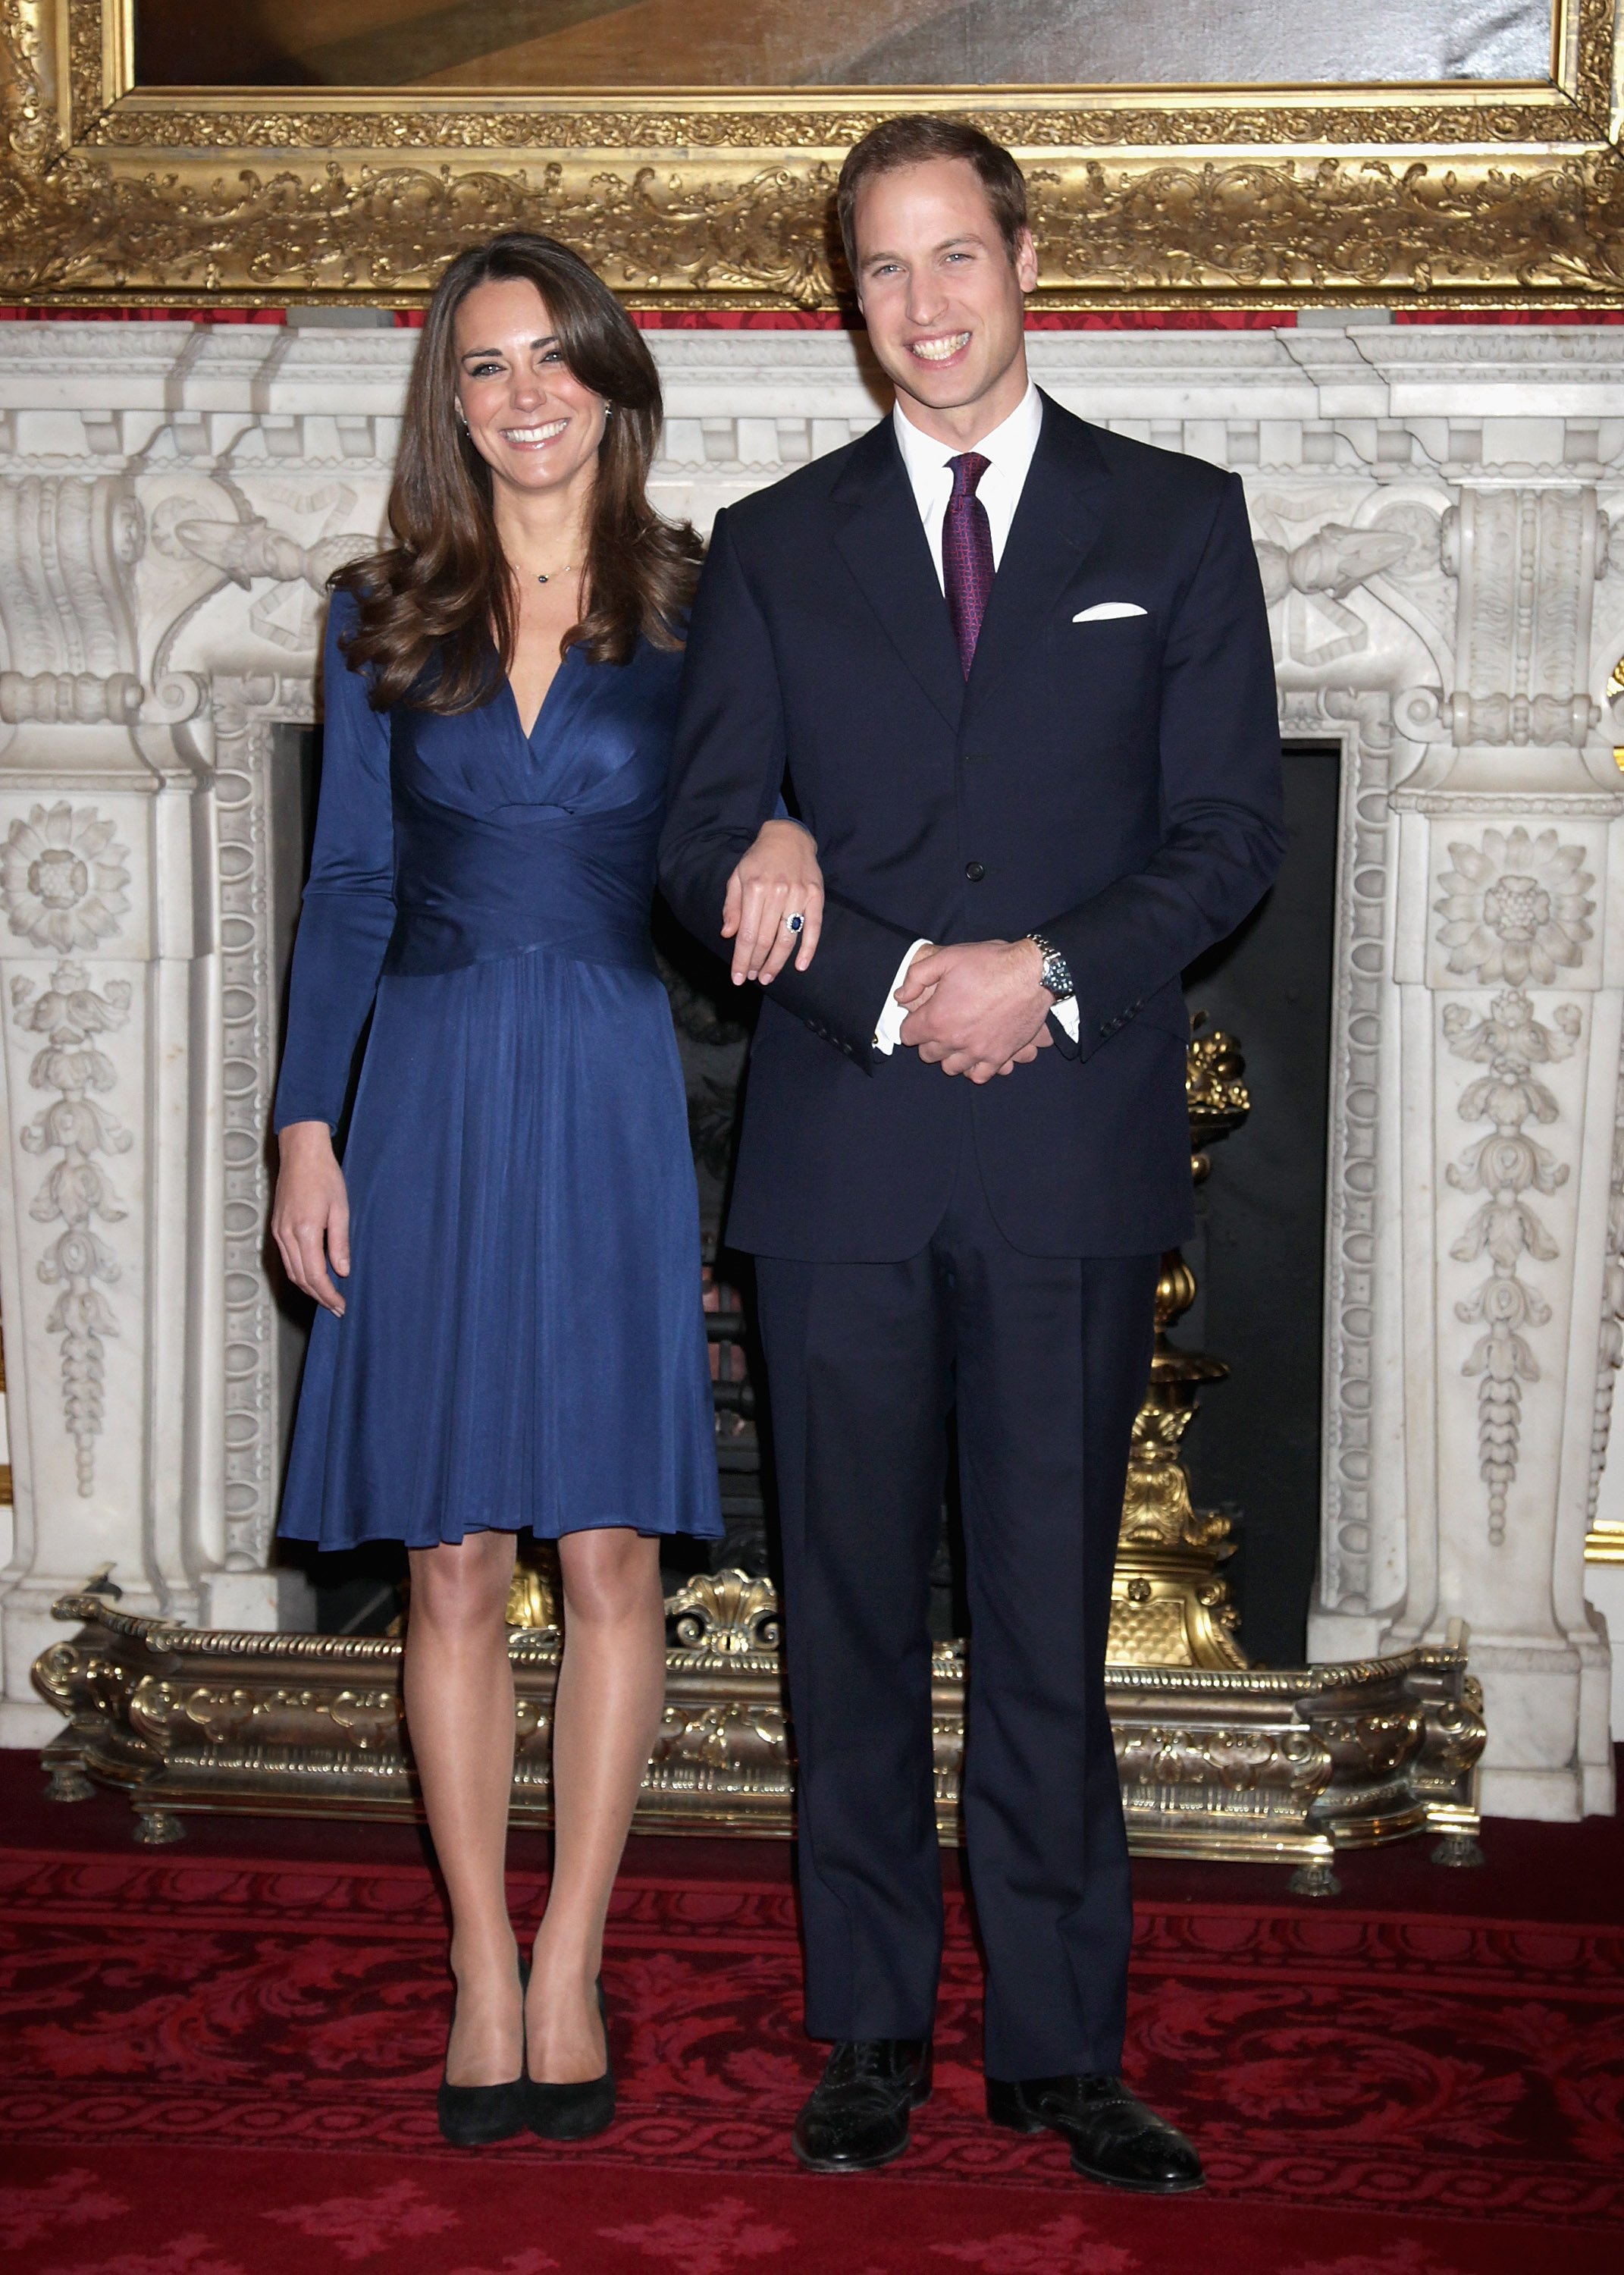 Prince William and Kate Middleton pose for photographs in the State Apartments of St James Palace on November 16, 2010 in London, England. | Source: Getty Images